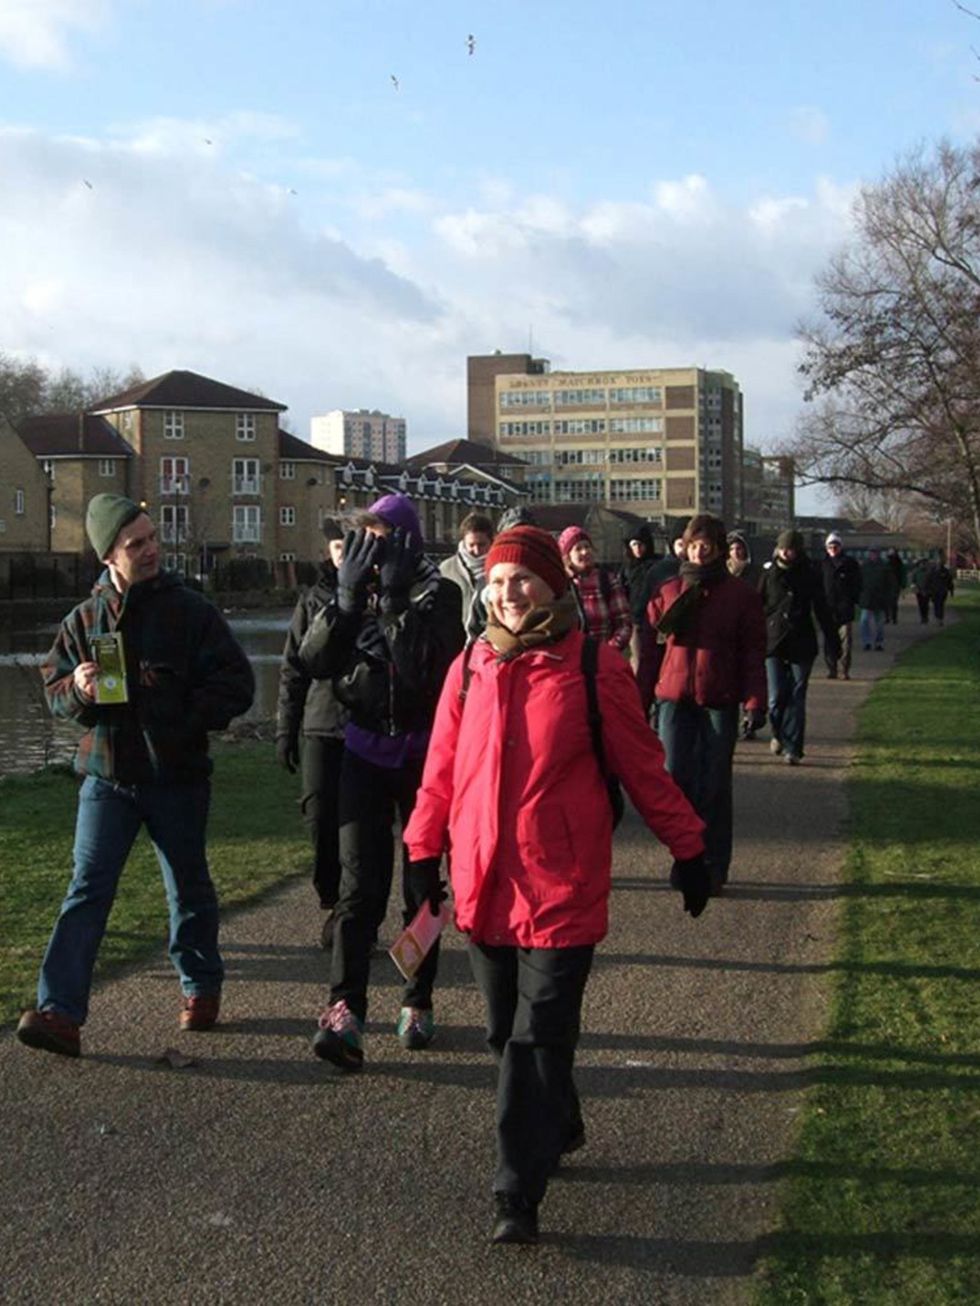 <p><strong>DAY OUT: TFLs Winter Wanders Weekend</strong><br />
<br />
Dust off the cobwebs and take part in one of TFLs guided walks around London this weekend.<br />
<br />
There are over 40 to choose from, ranging from a 1.5-mile stroll through the ci